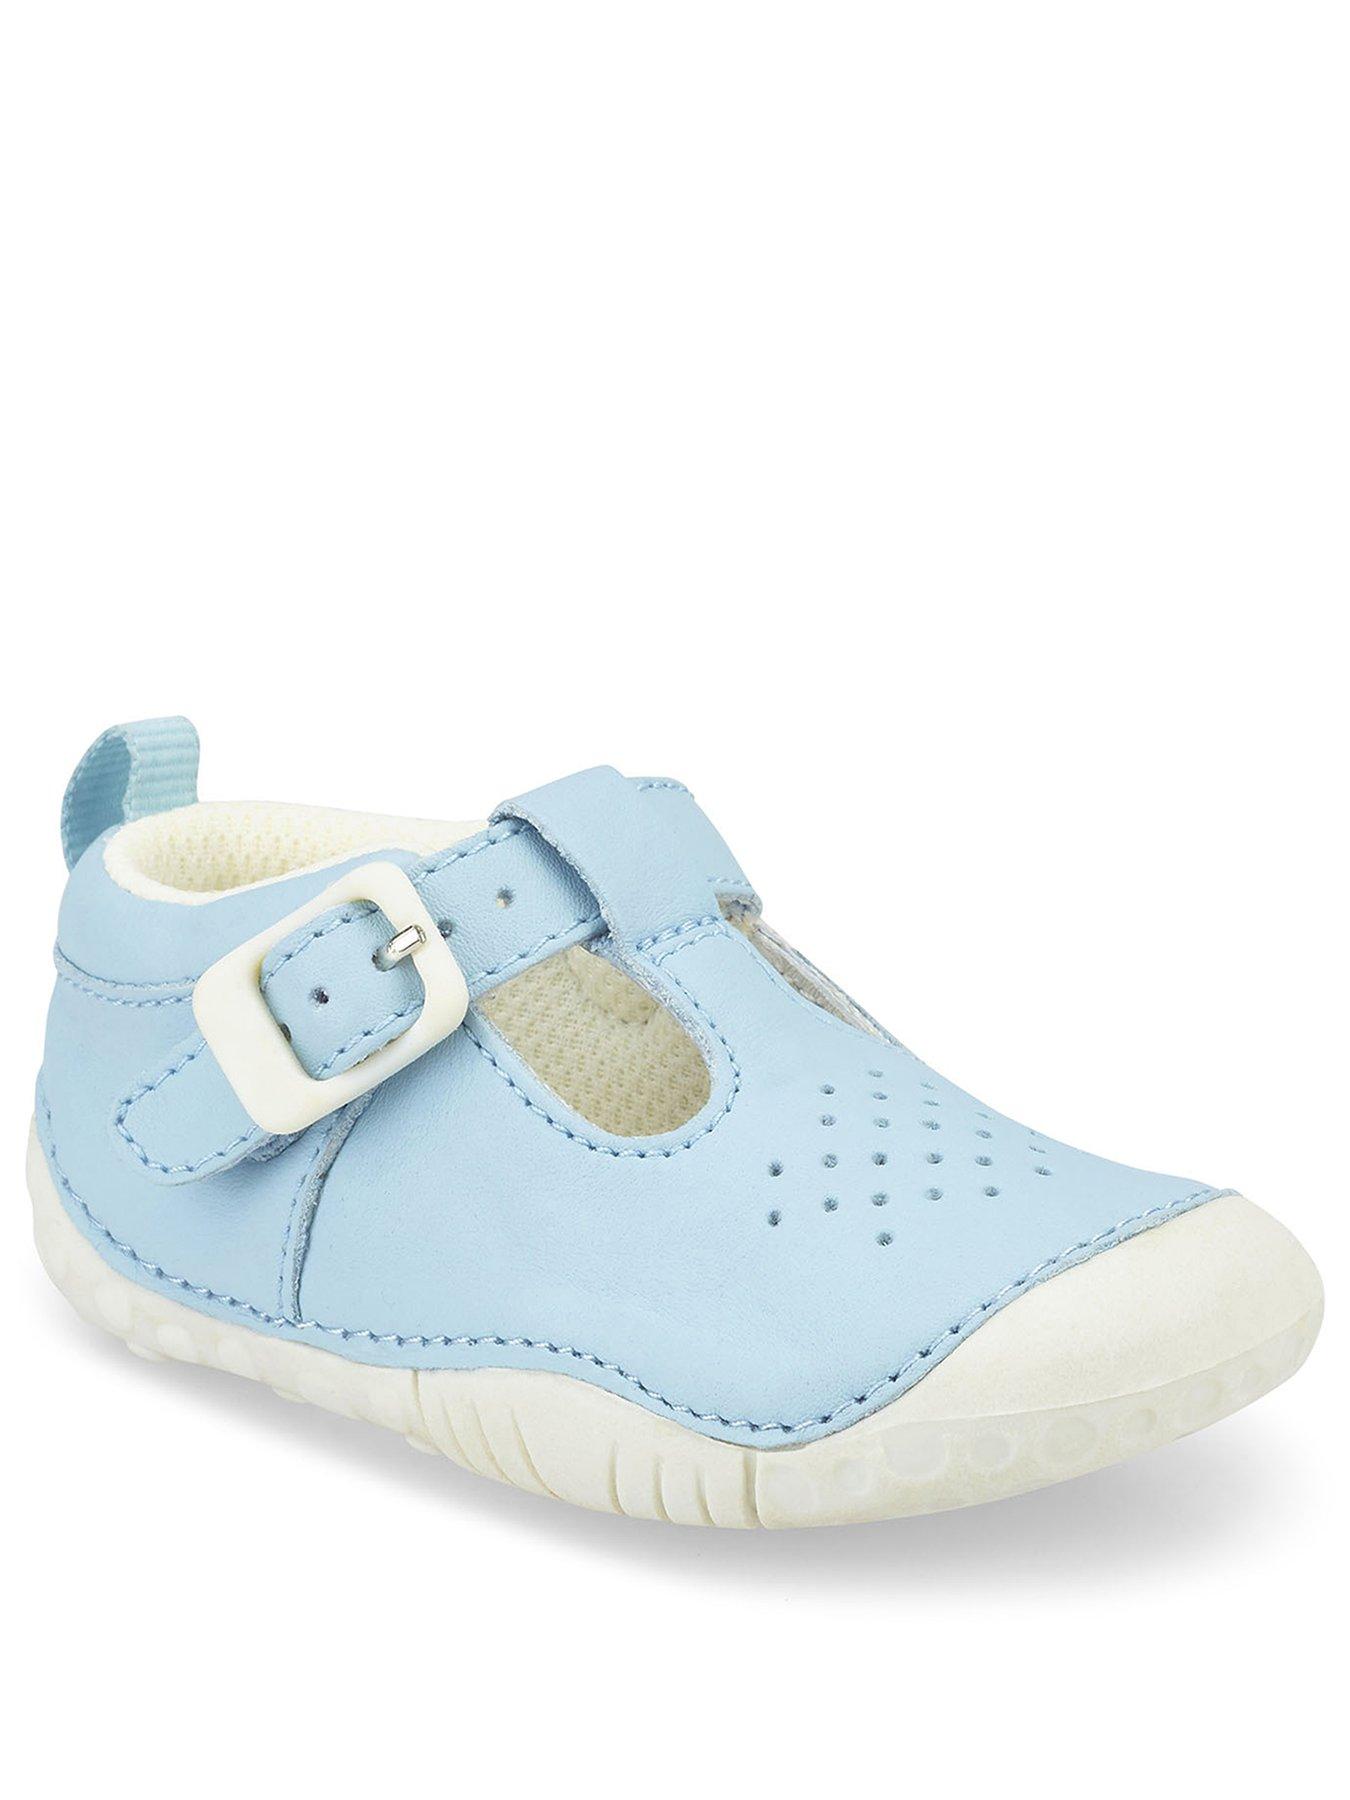 baby shoes wide fit